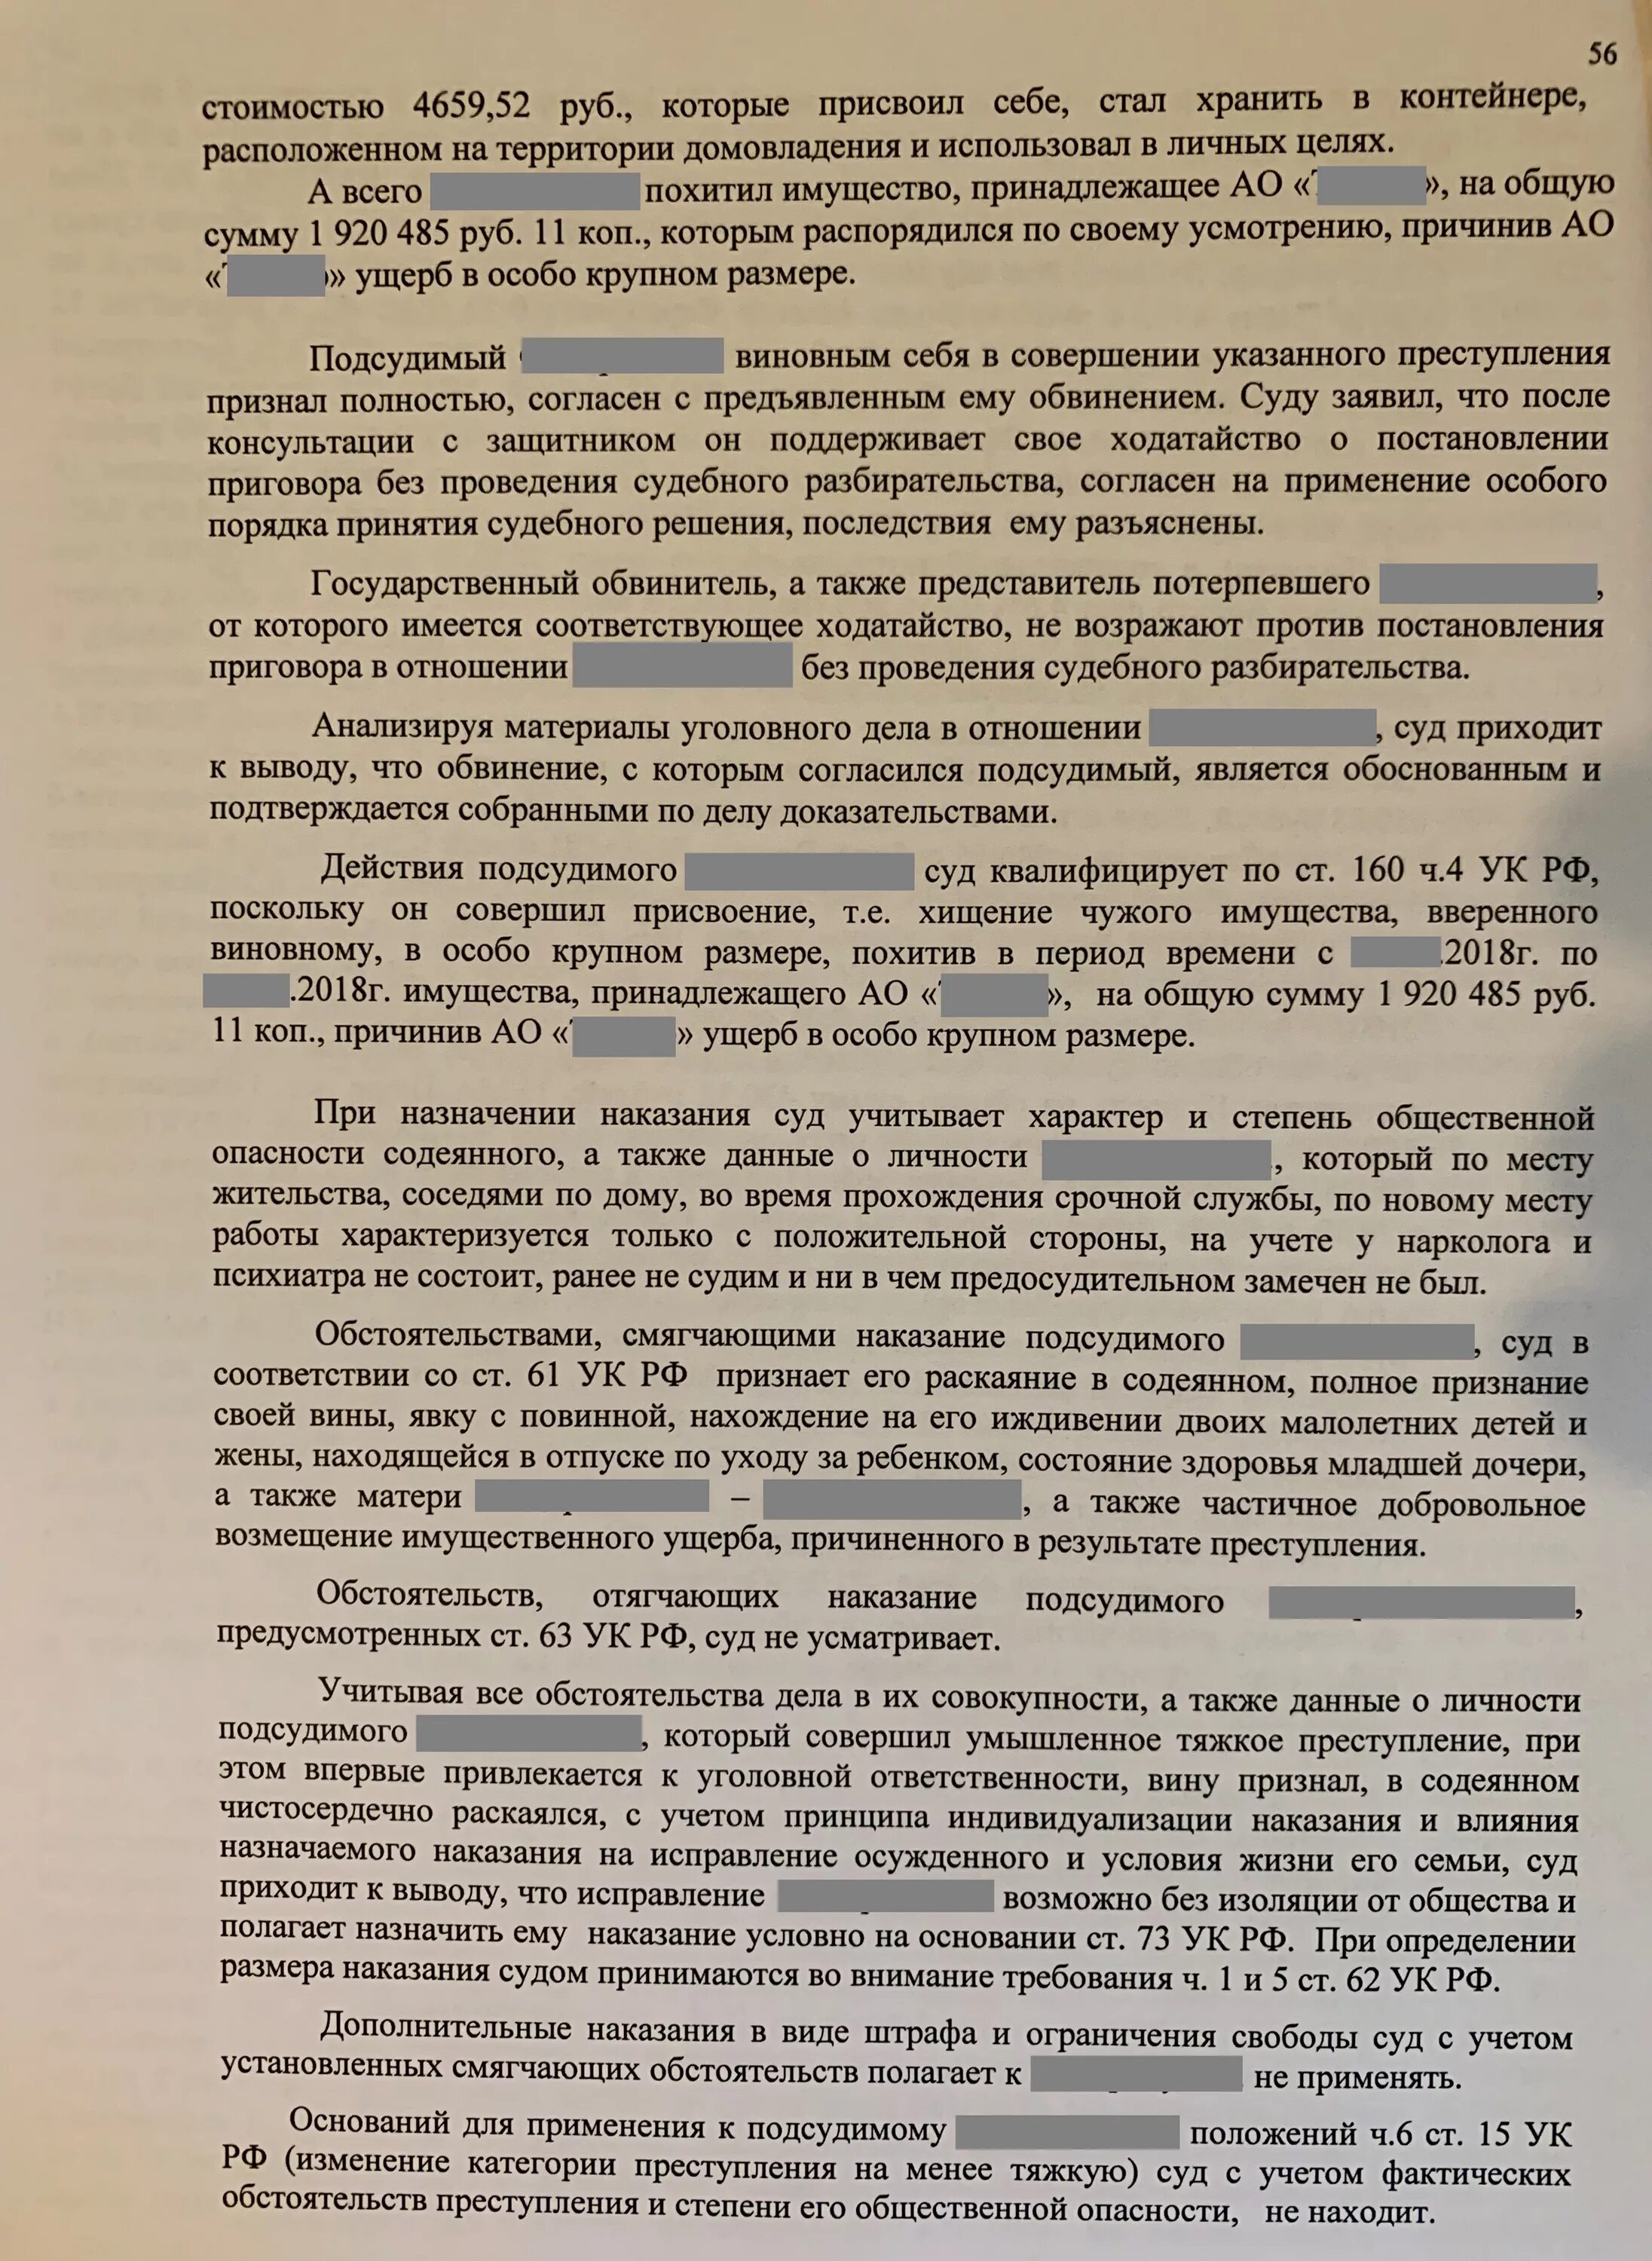 Ст 160 УК РФ. Ст 160 ч 4 УК РФ. Приговоры по 160 УК РФ. Приговоры по ст 160 УК РФ Ч 3.